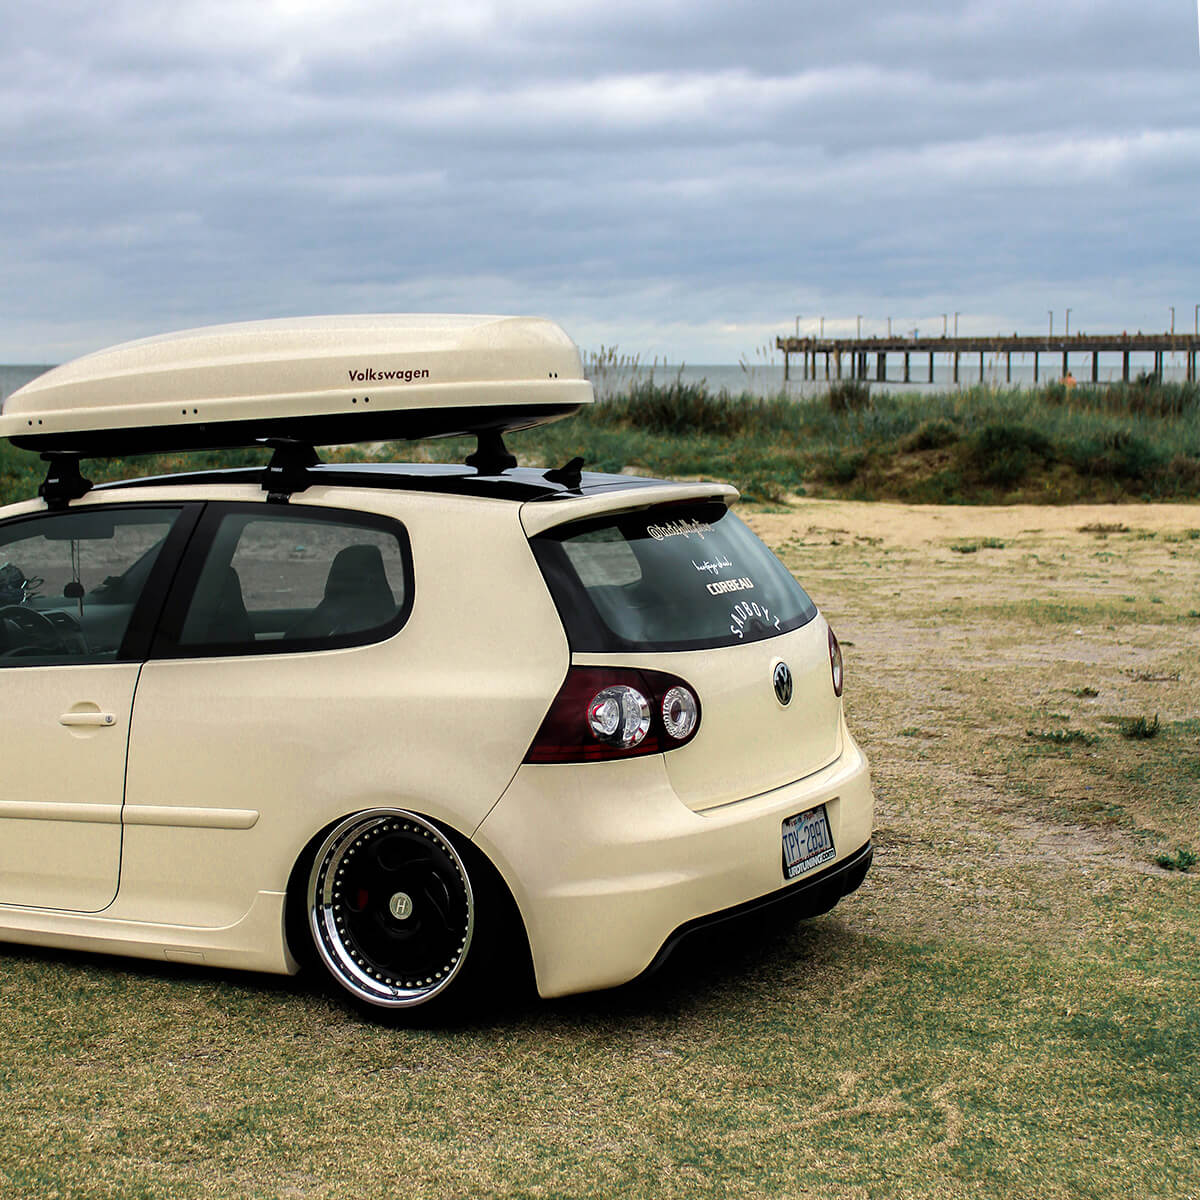 Golf MK4 with a Atlas roof box and Thule aeroblade roof rack